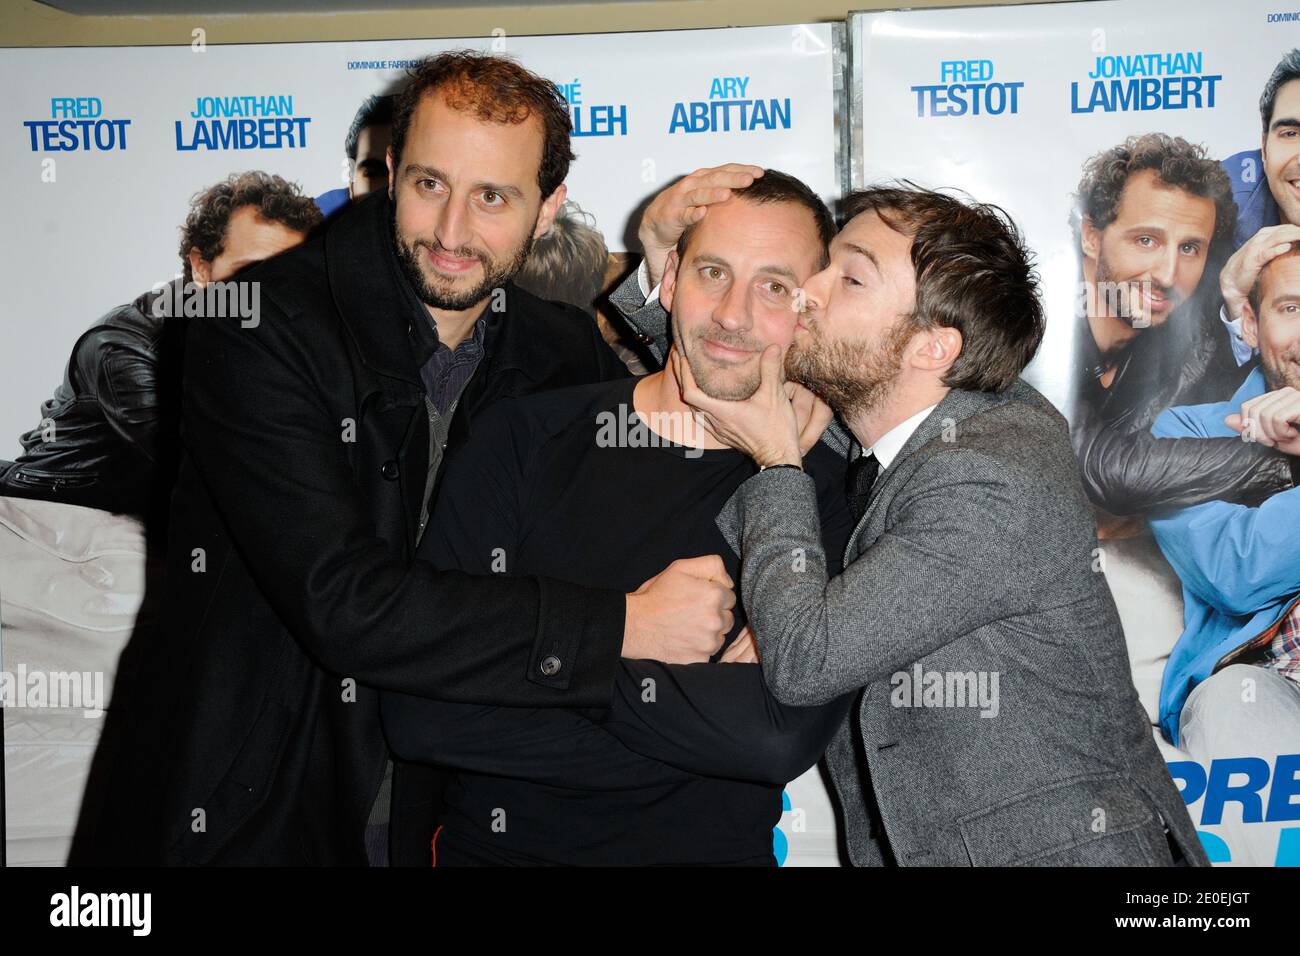 Fred Testot , Jonathan Lambert and Arie Elmaleh attending the premiere of 'Depression et des Potes' at UGC Les Halles theater, in Paris, France on April 26, 2012. Photo by Alban Wyters/ABACAPRESS.COM Stock Photo